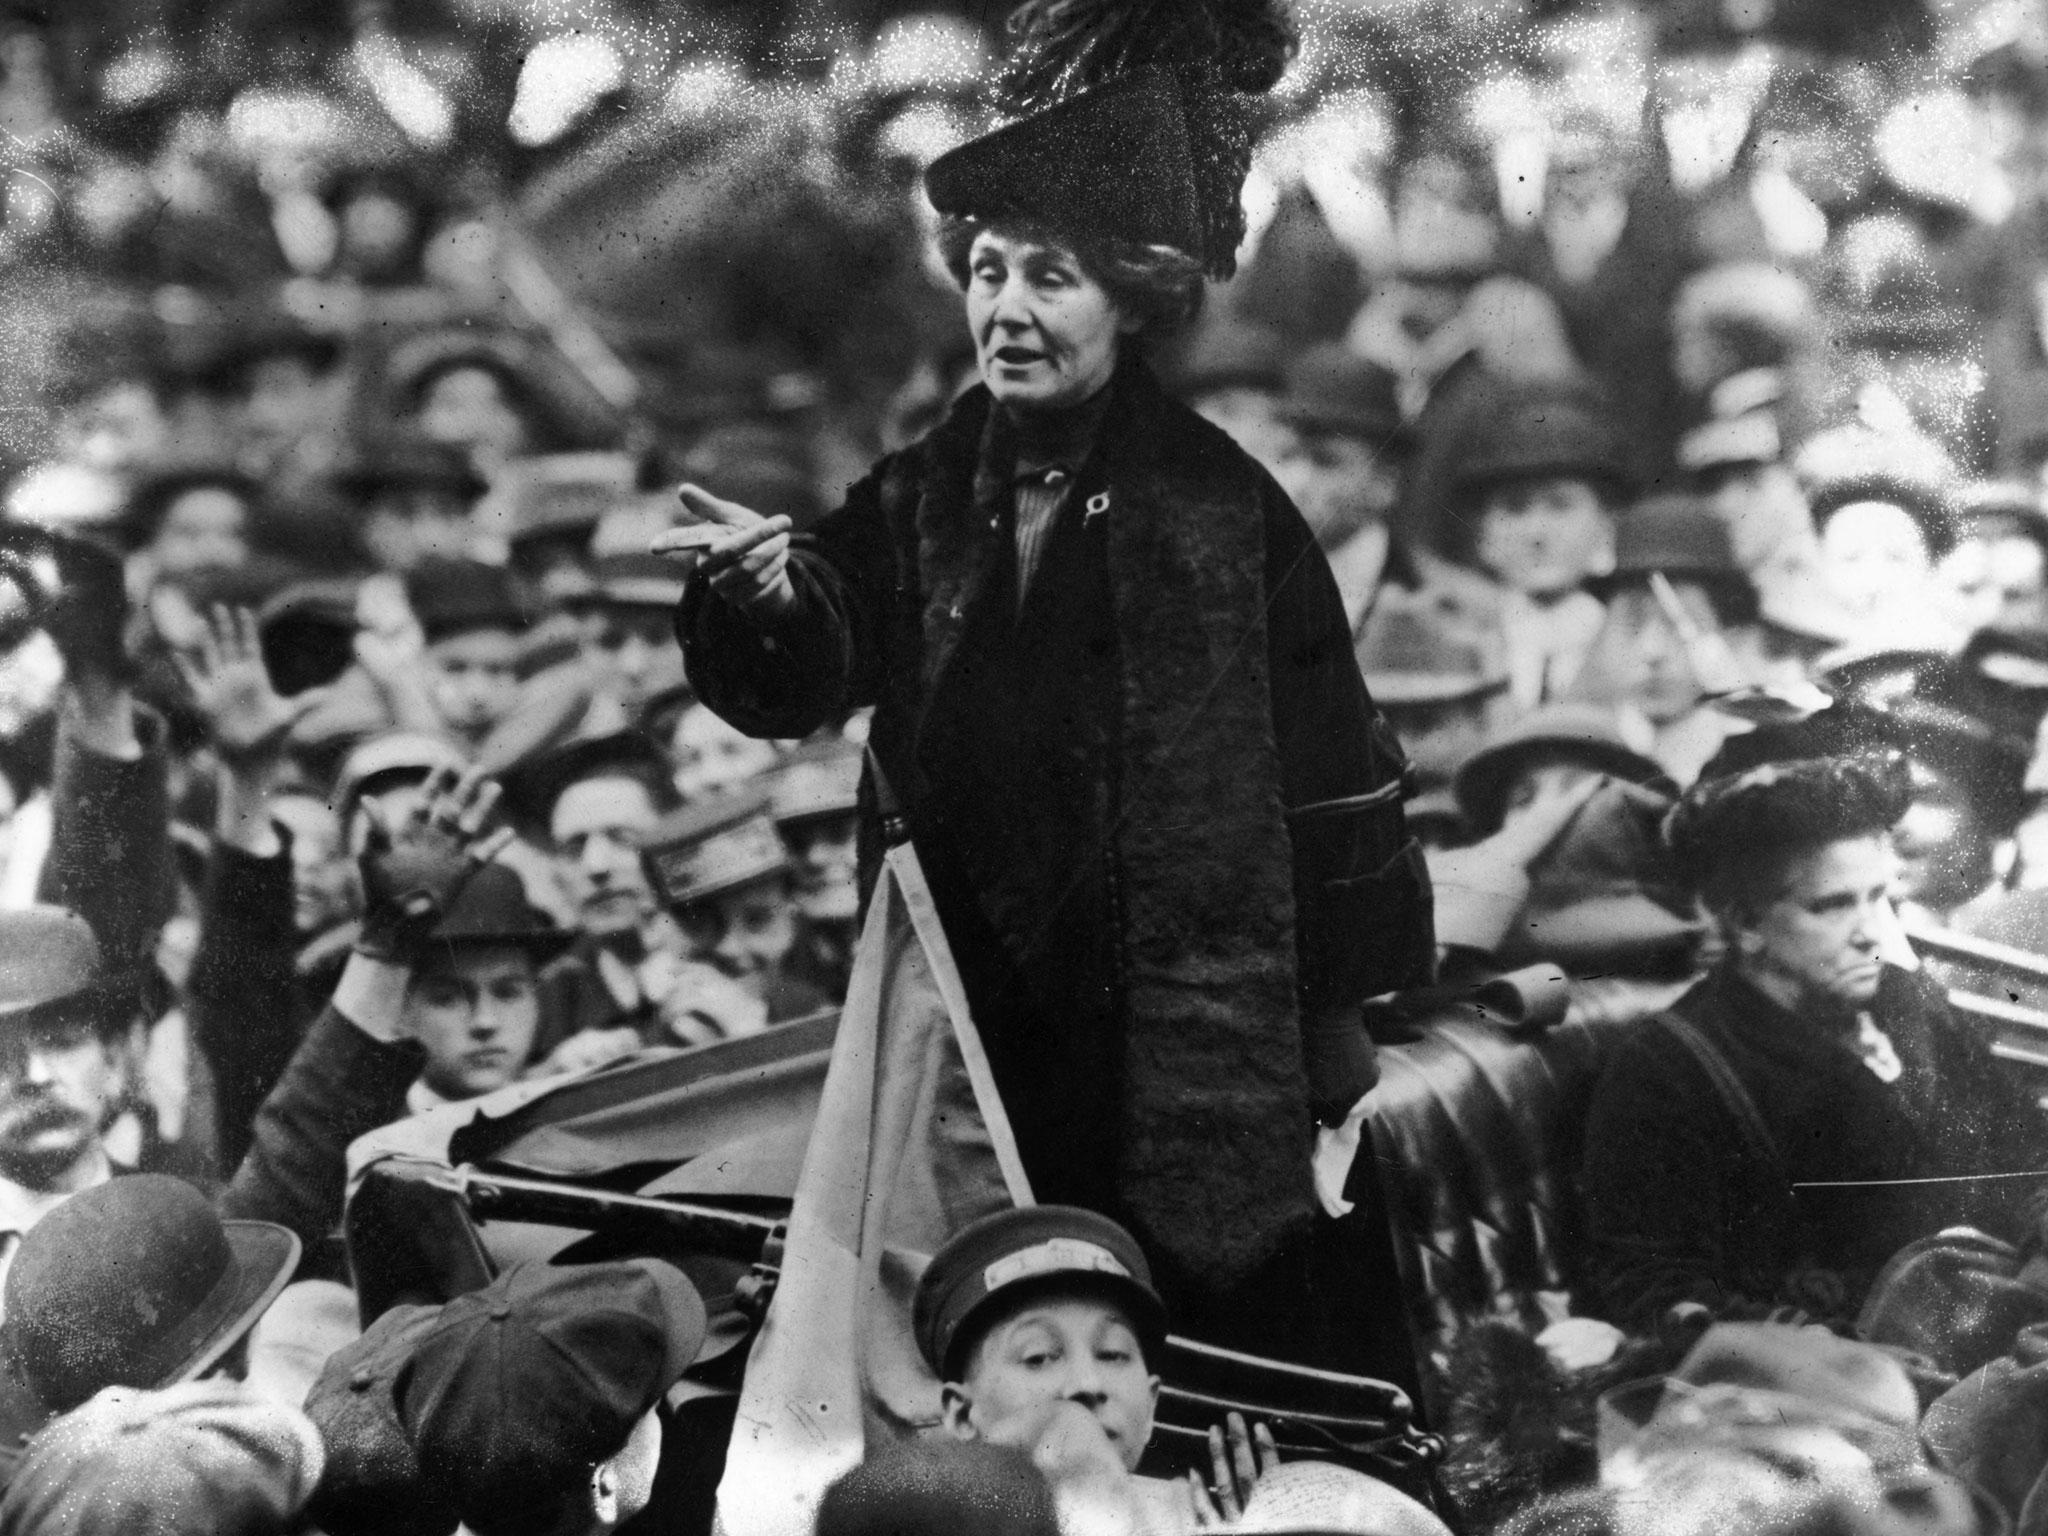 British suffragette Emmeline Pankhurst being jeered by a crowd in New York in 1911